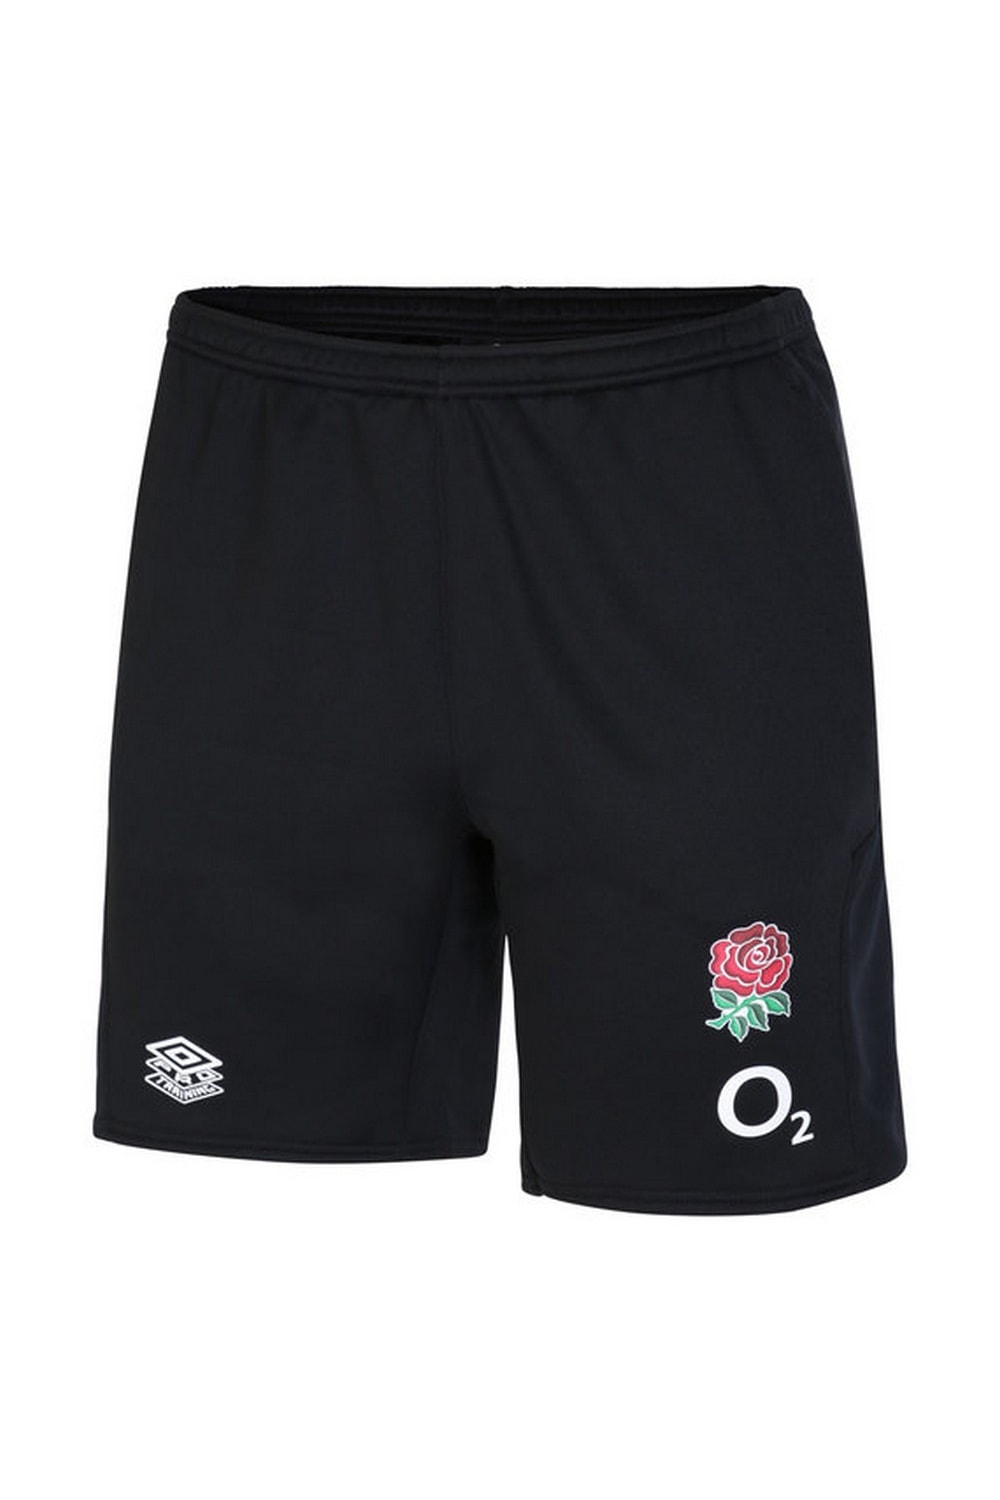 England Rugby Mens 22/23 Knitted Shorts